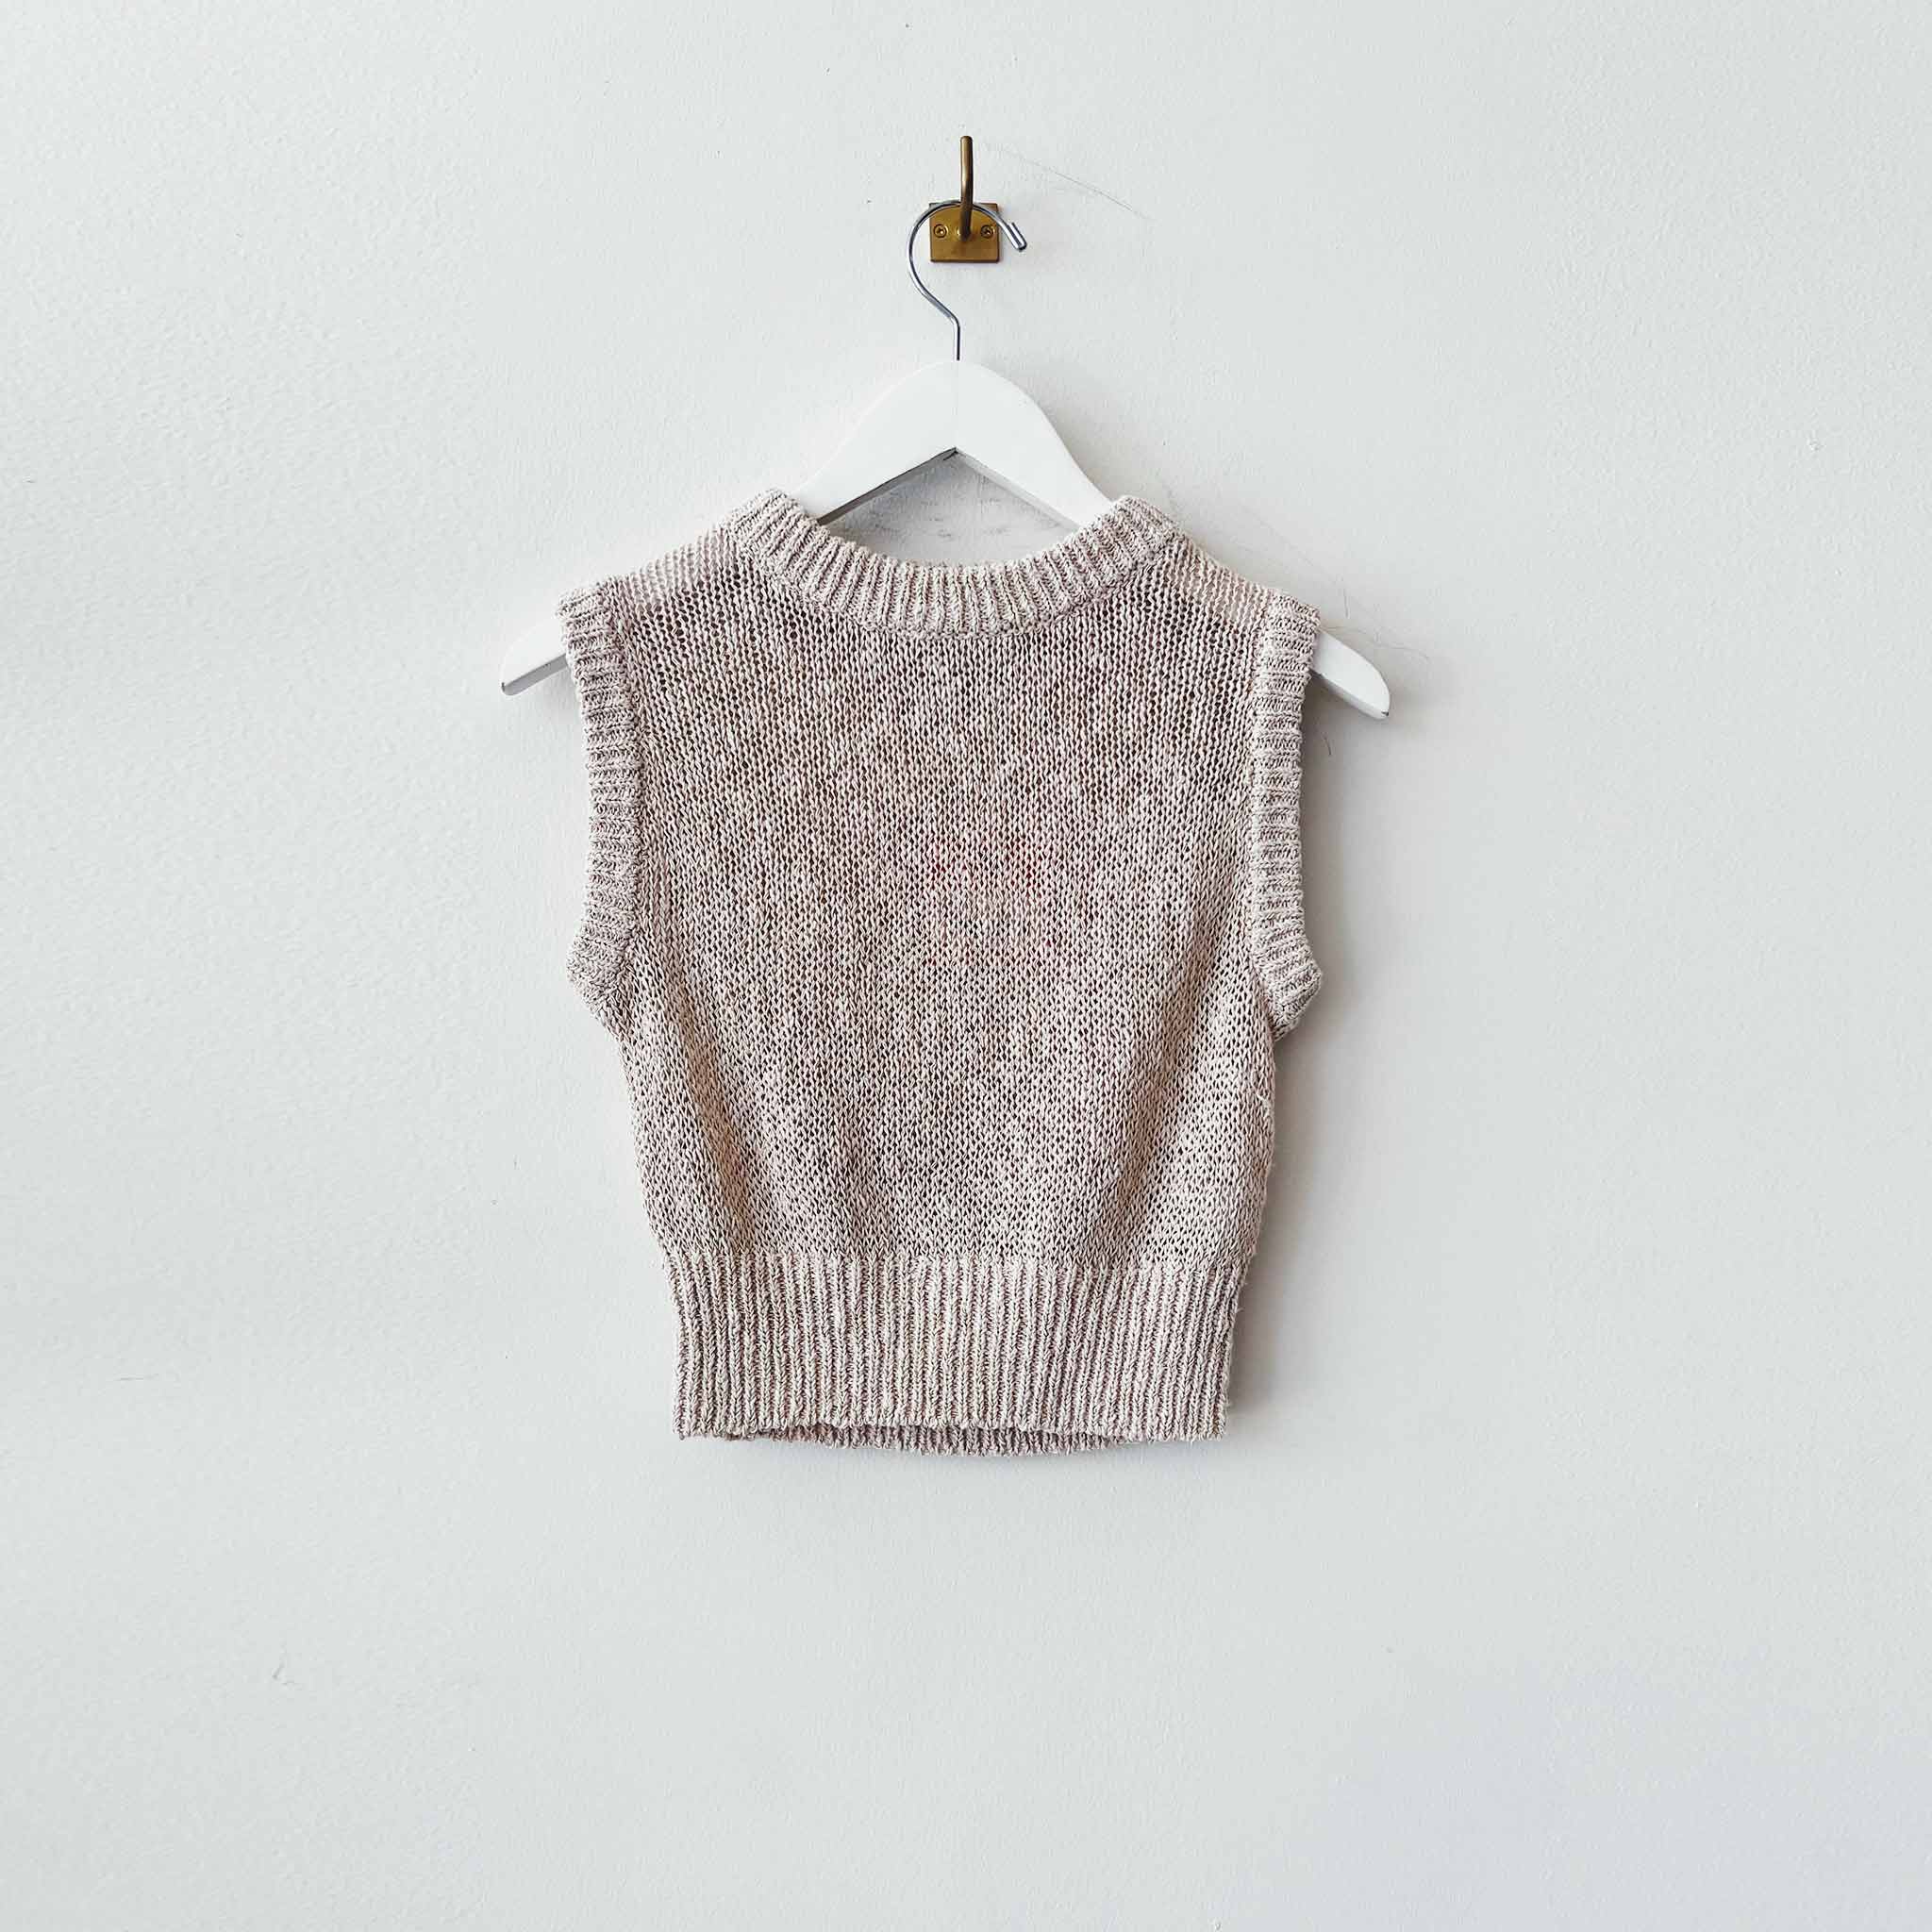 Close flat photo of the Knit Vest - Oatmeal.